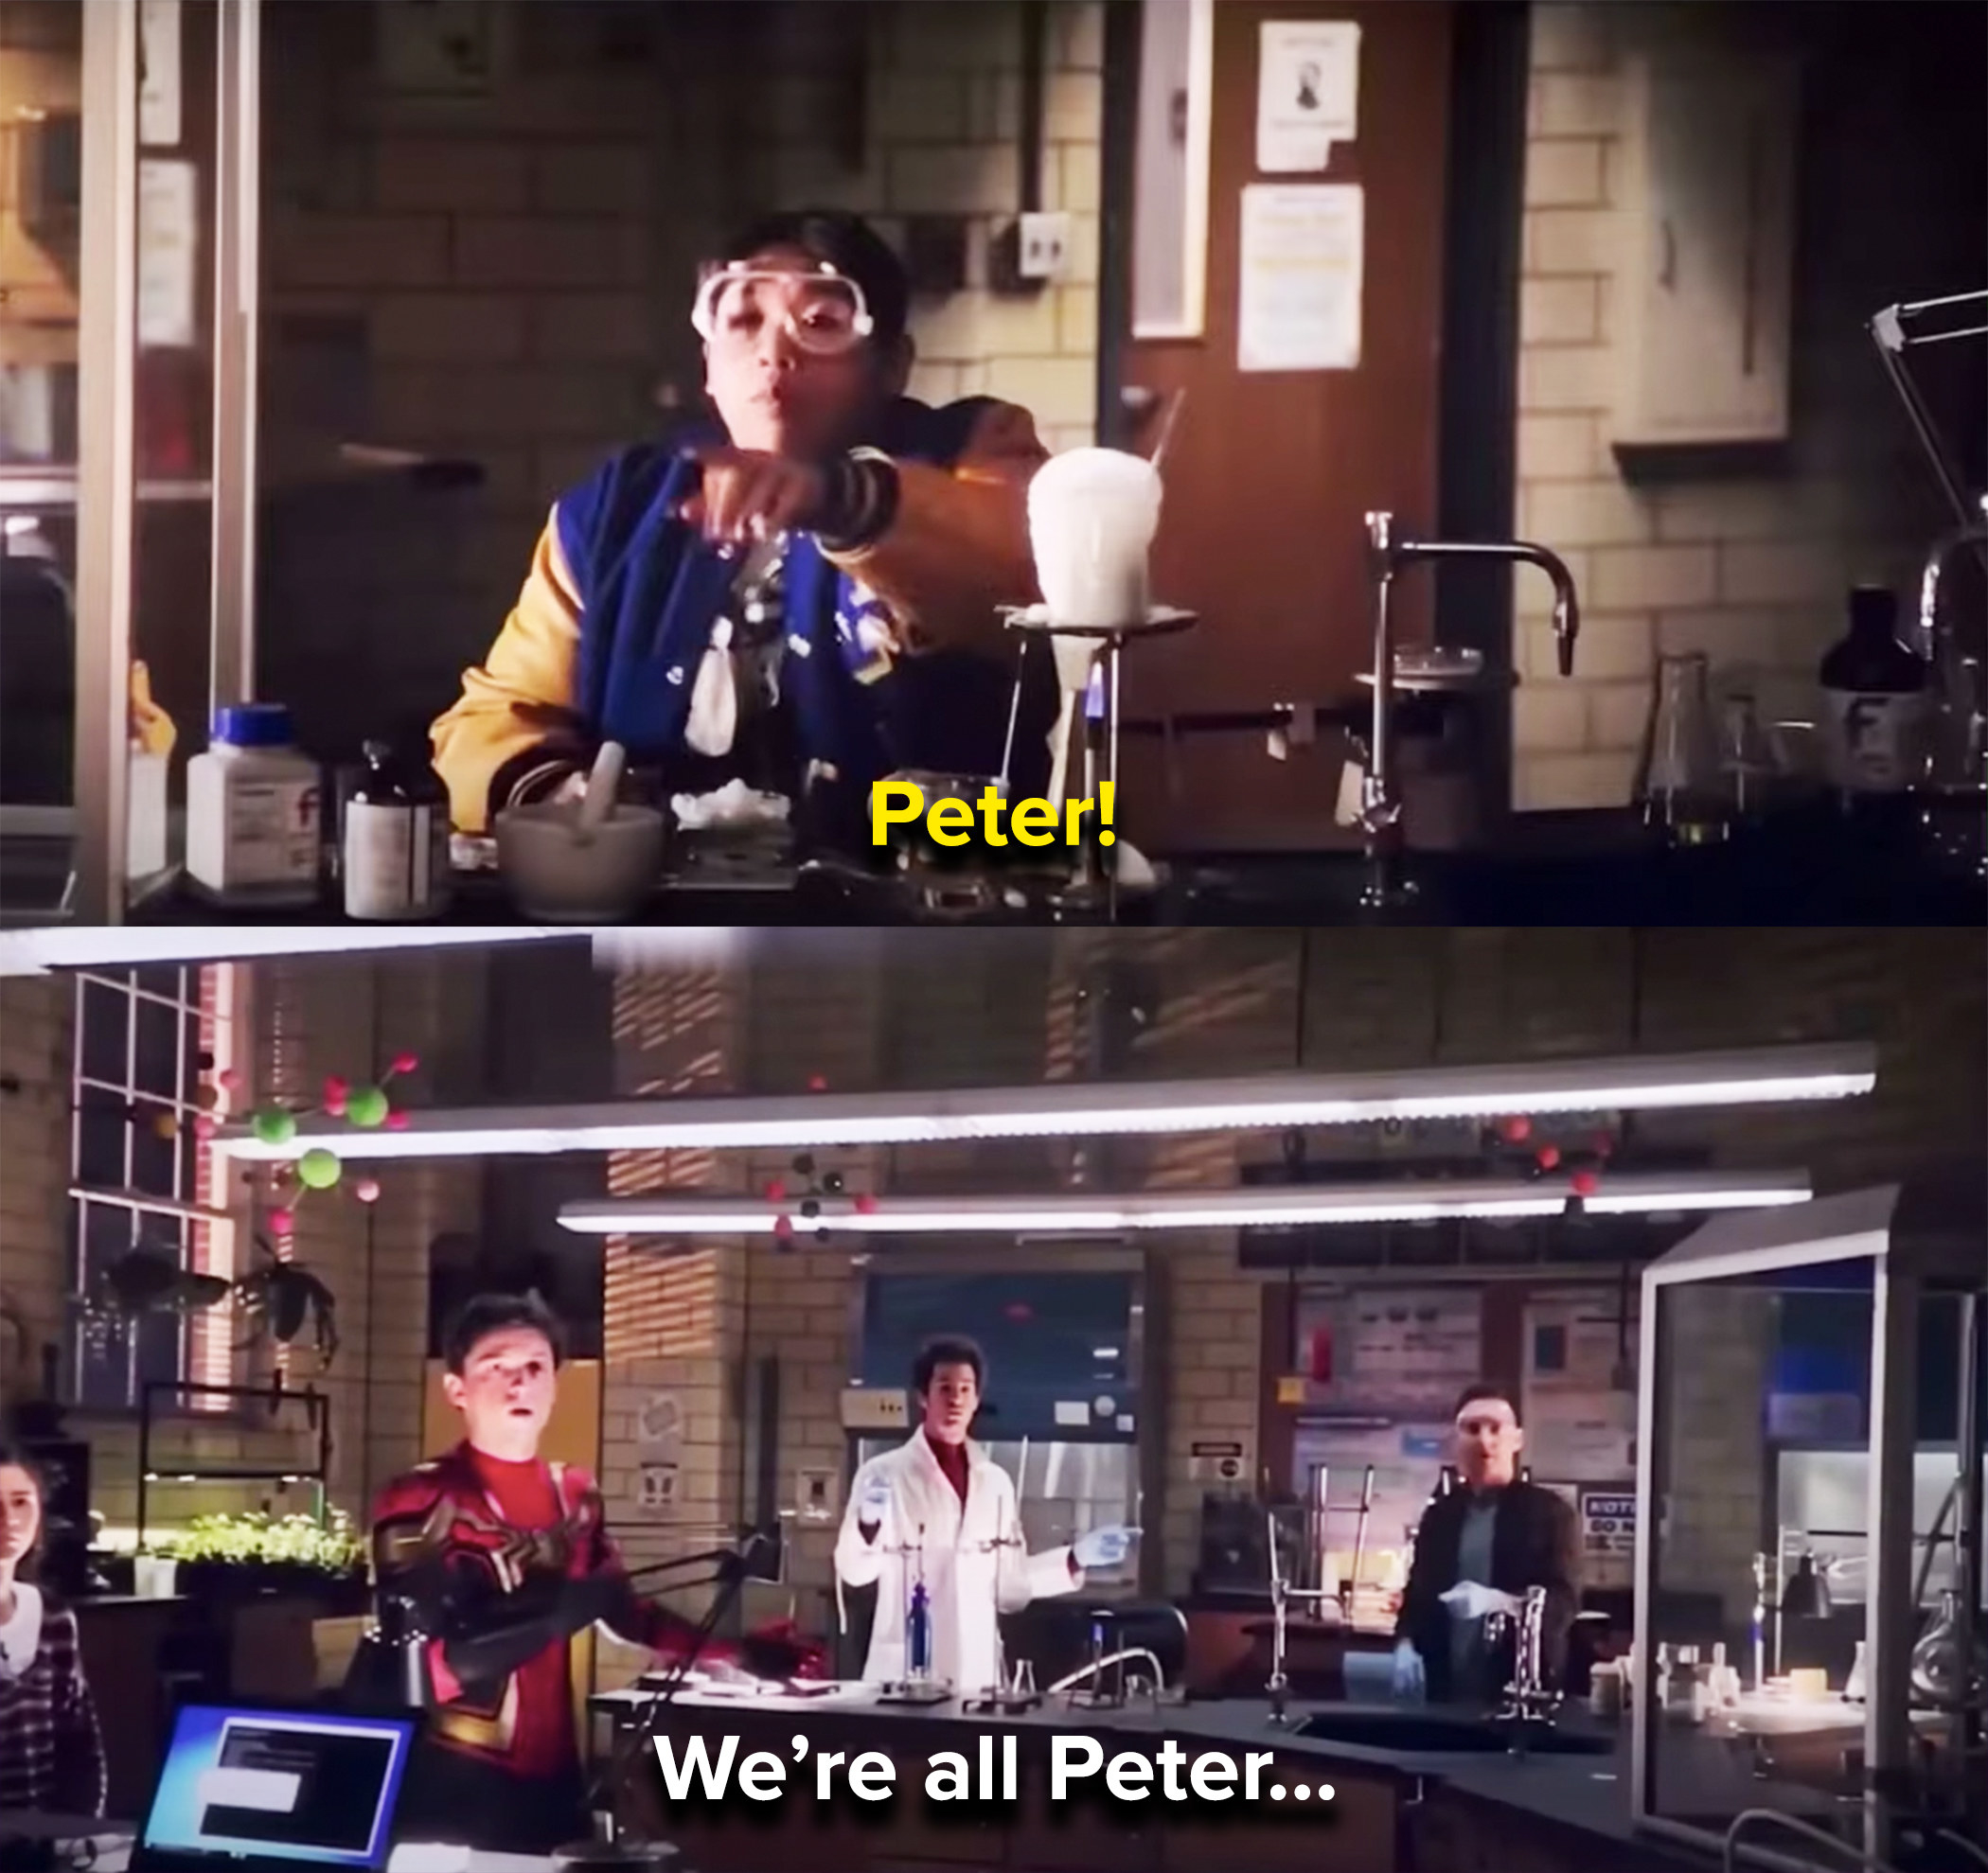 Ned calls for Peter, but all three Peters point to each other, trying to figure out which one he means